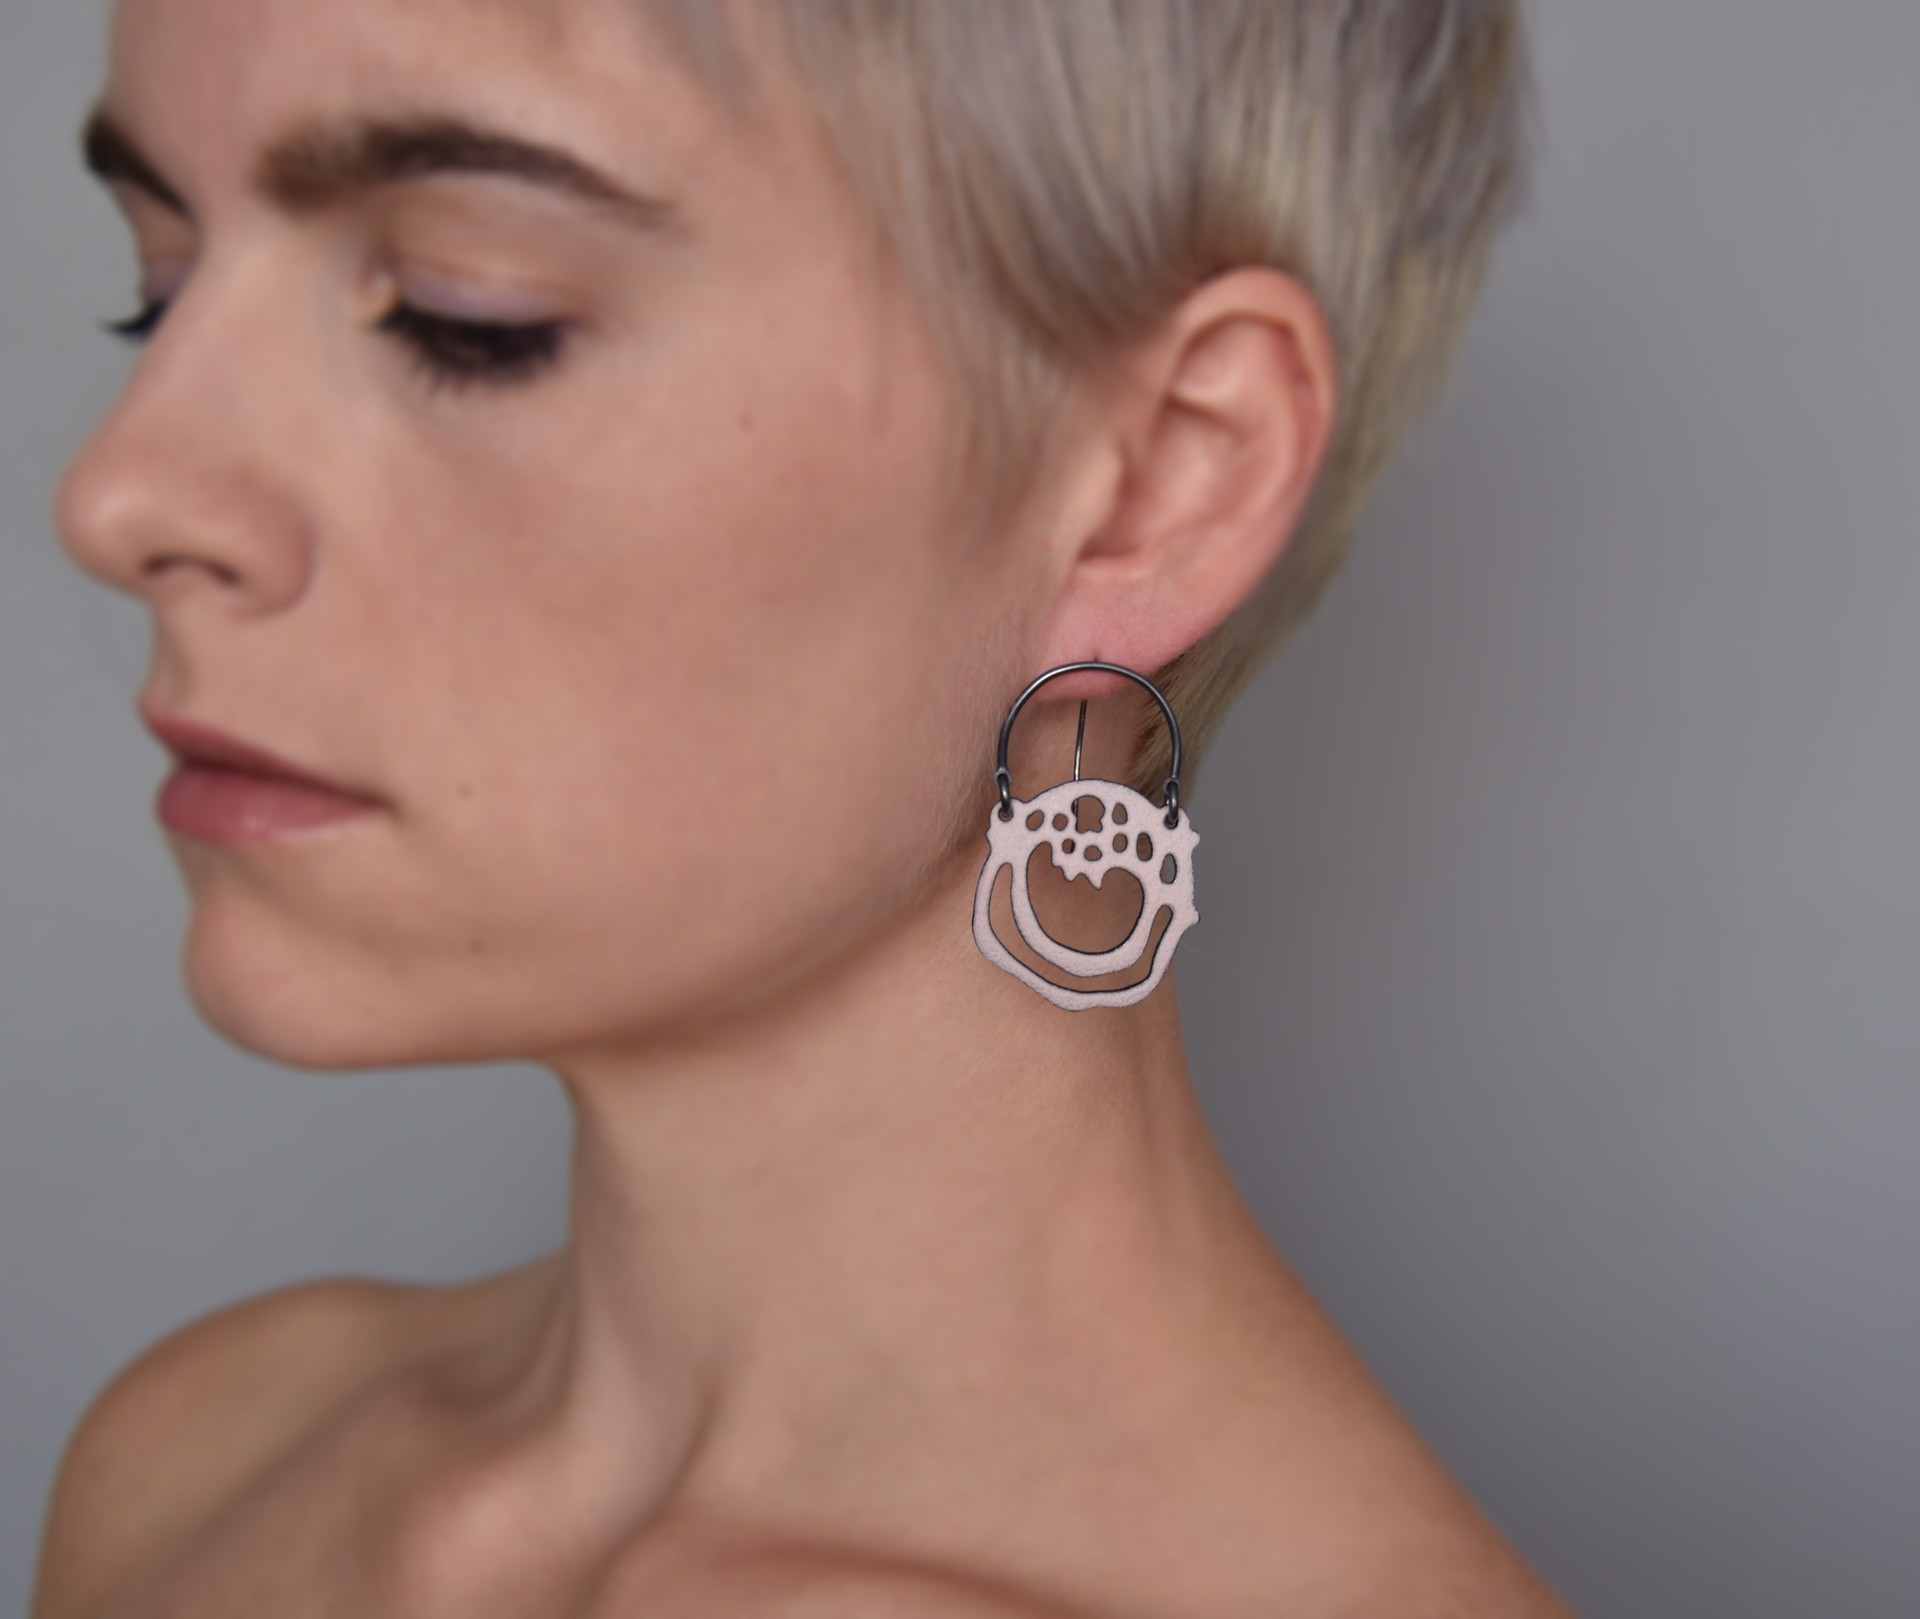 Round Cell Earrings by Joanna Nealey